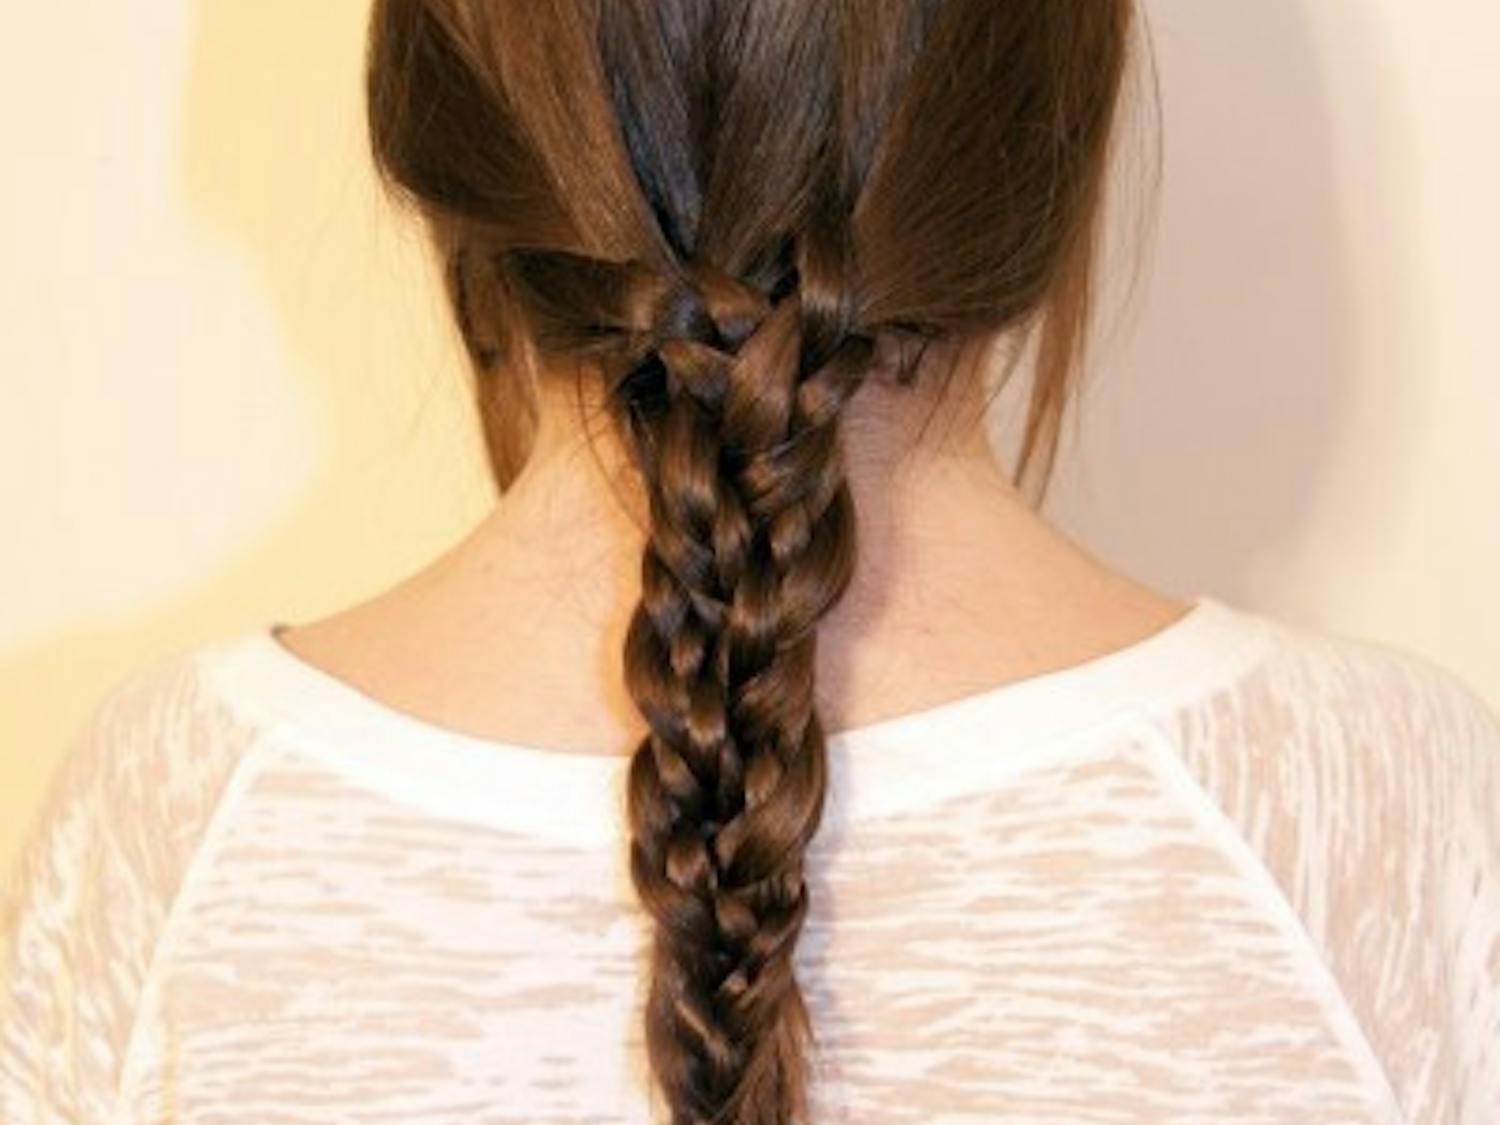 The double rainbow’s got nothing on this double Inception braid. “Project” this one on yourself!